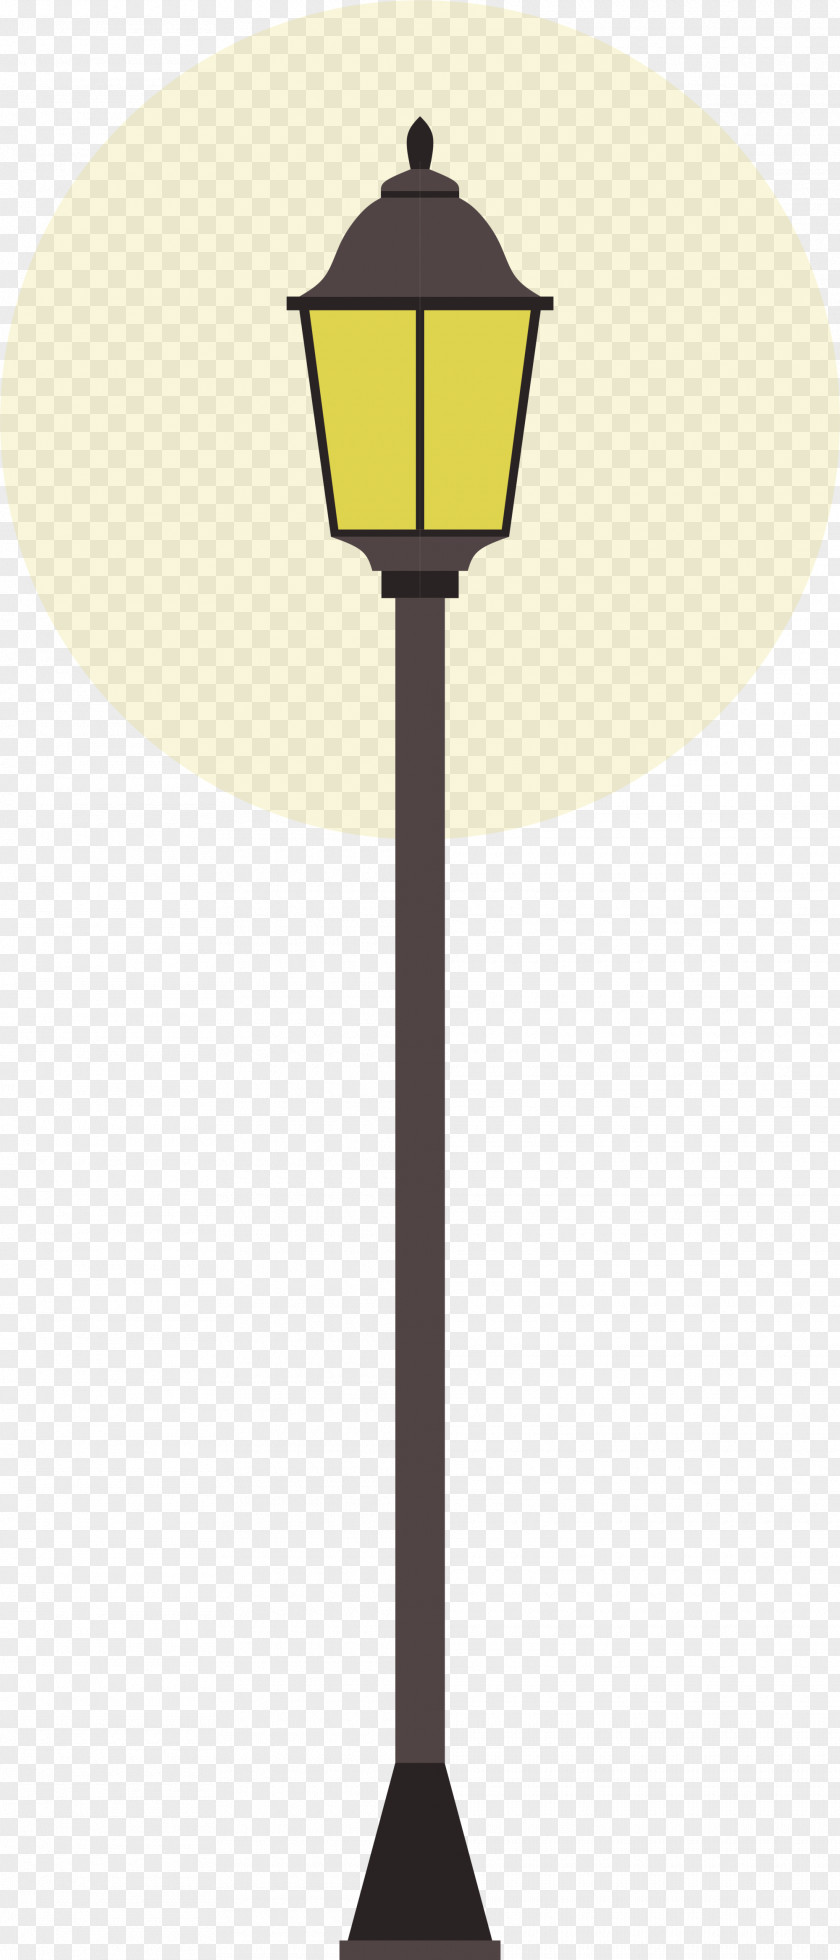 Yellow Simplified Street Lamp PNG simplified street lamp clipart PNG